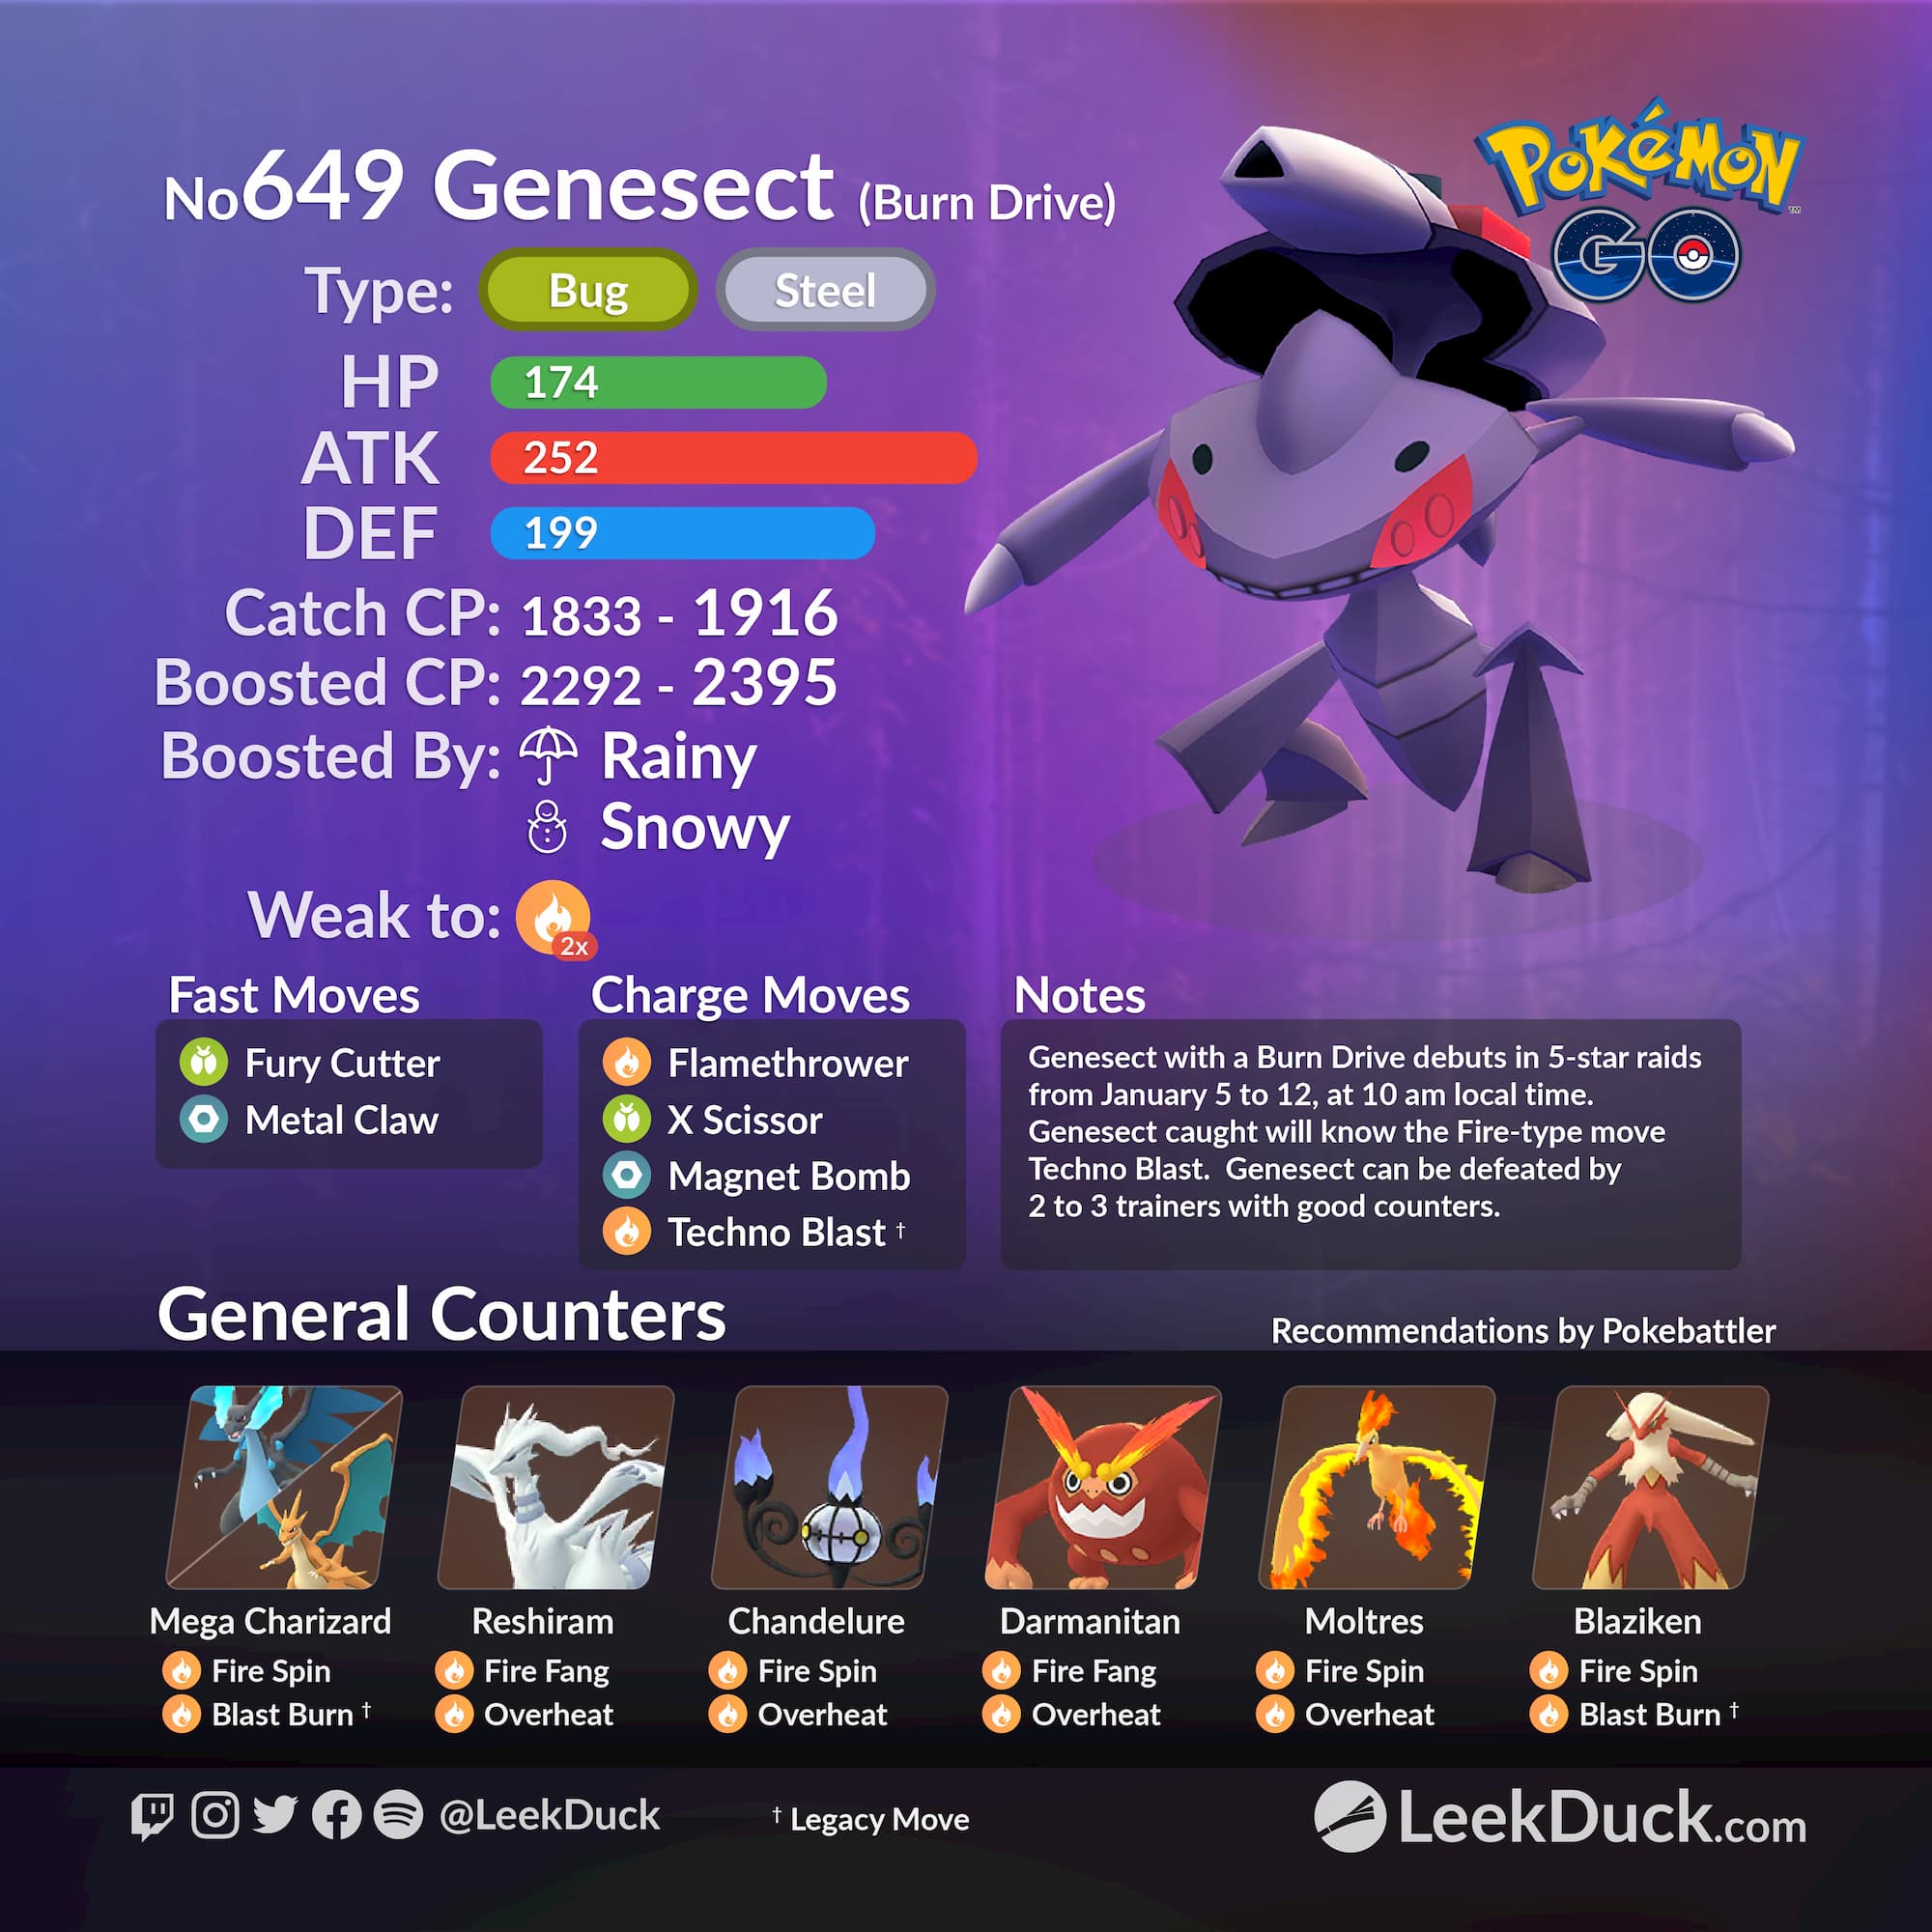 What is the best moveset for Genesect with Shock Drive in Pokemon GO?